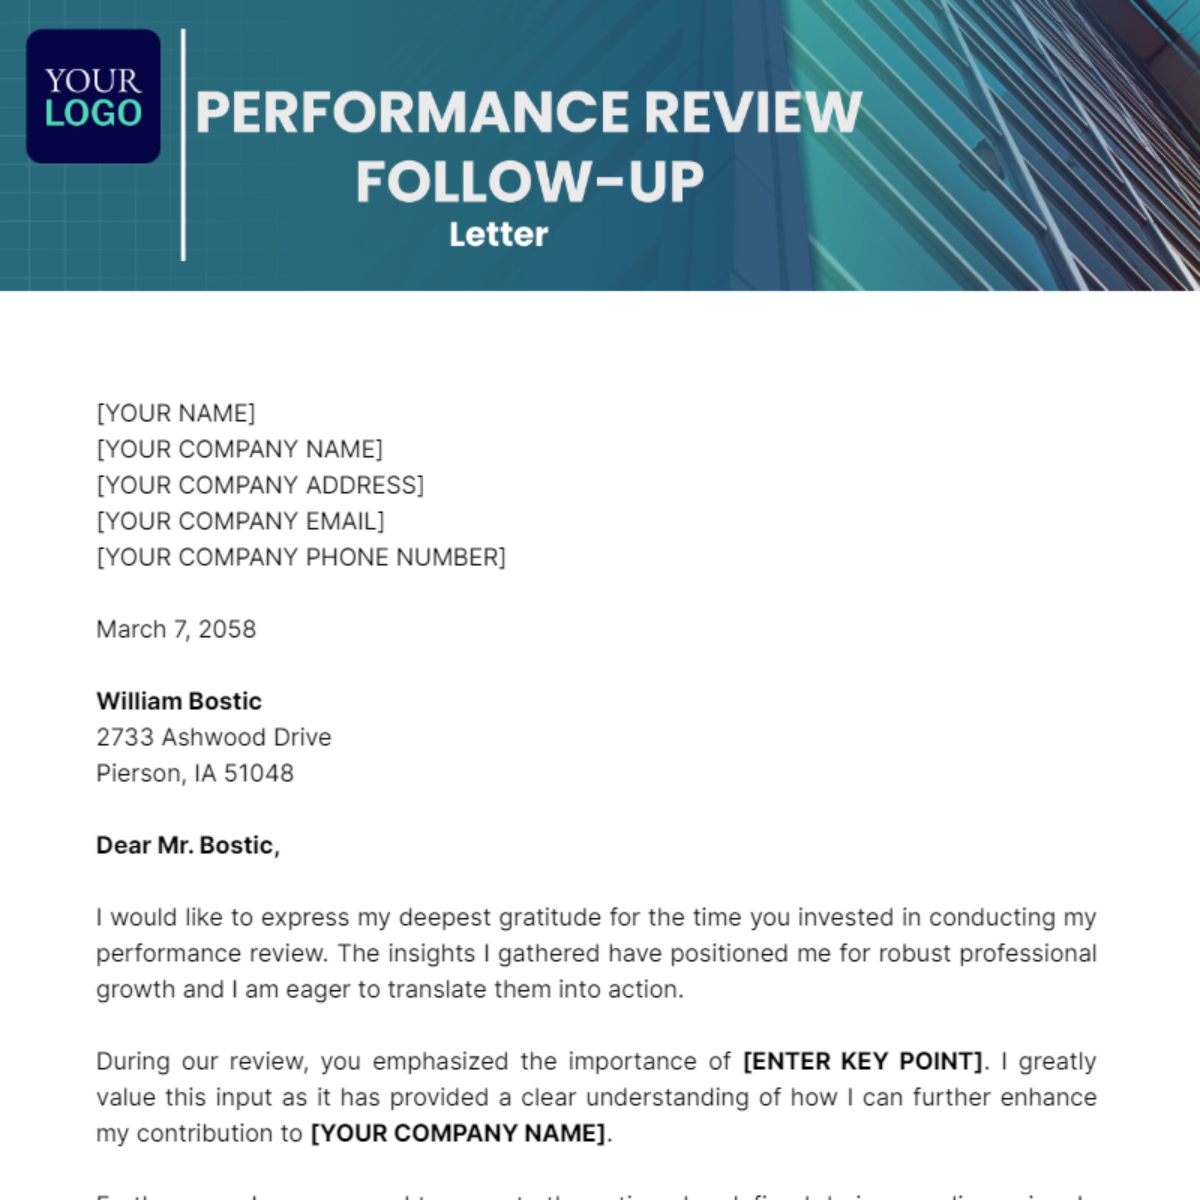 Performance Review Follow-Up Letter Template